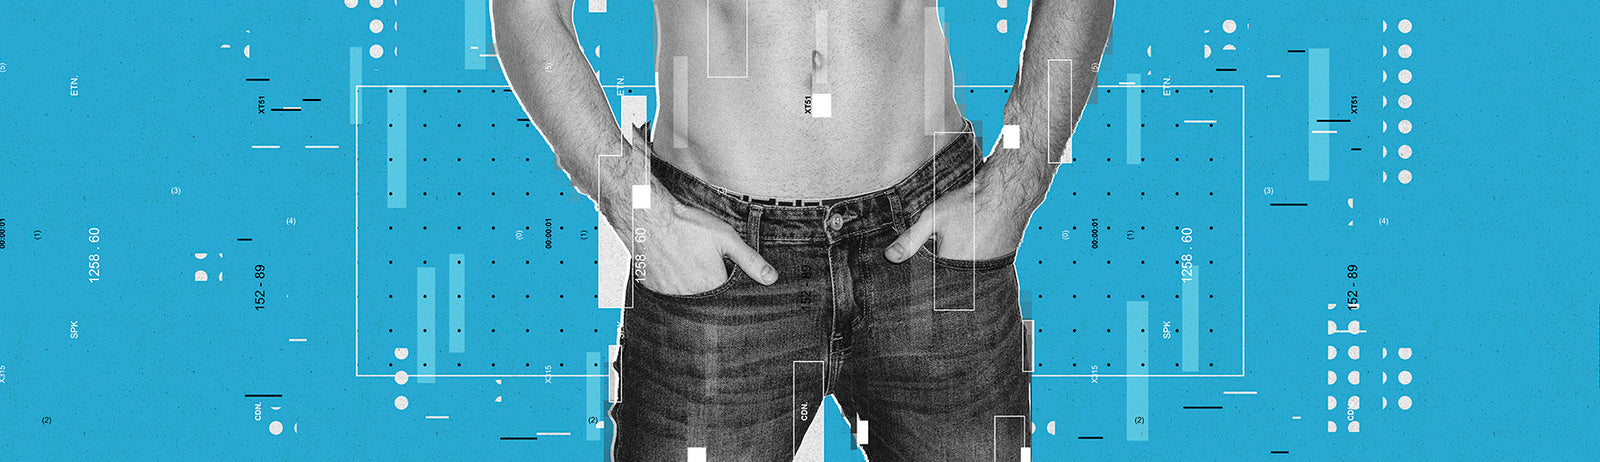 8 Proven Tips to Make your Bulge Look Bigger